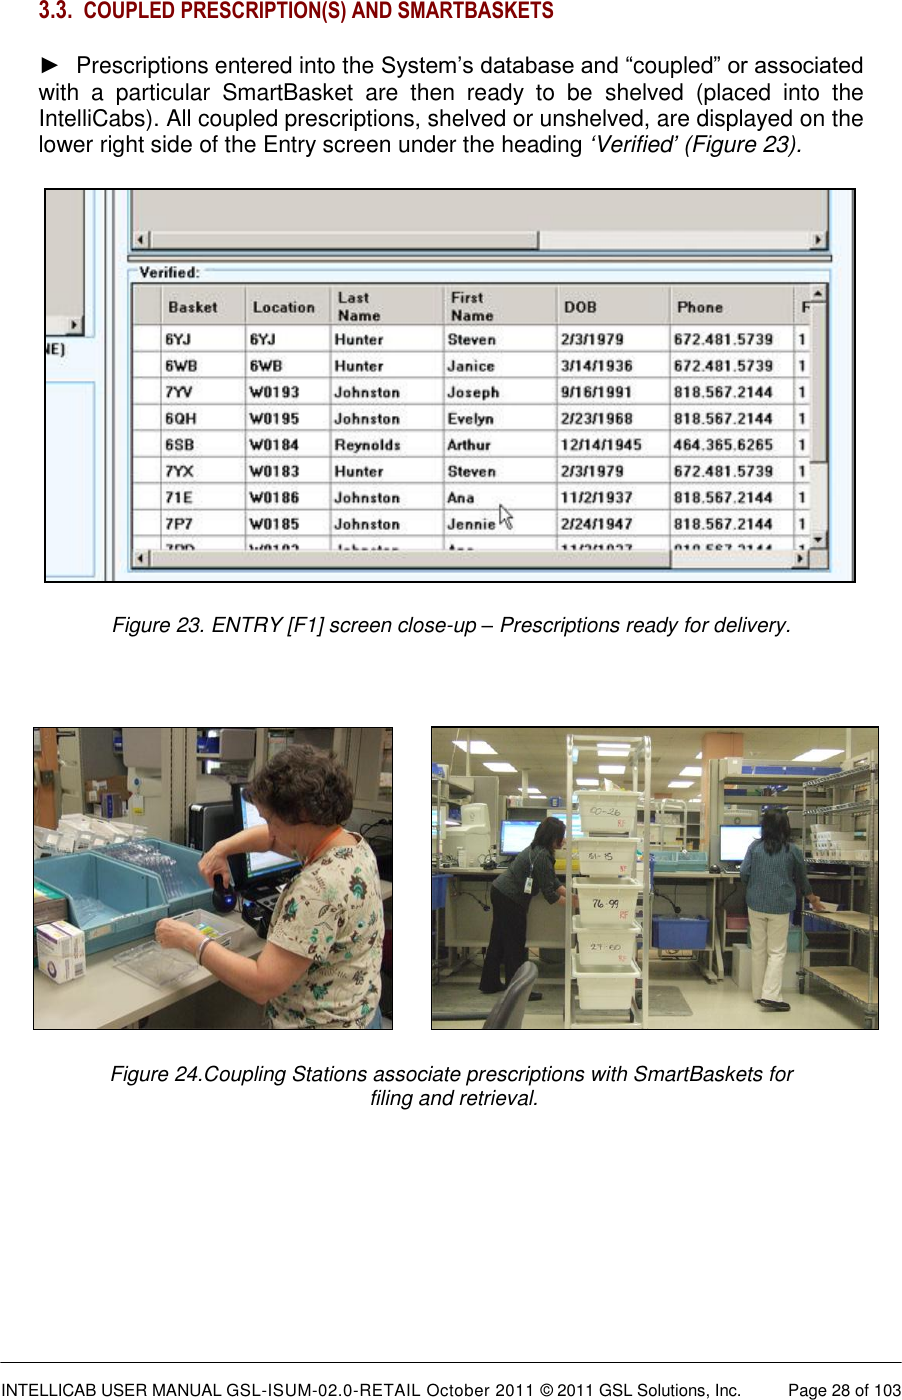  INTELLICAB USER MANUAL GSL-ISUM-02.0-RETAIL October 2011 © 2011 GSL Solutions, Inc.   Page 28 of 103   3.3. COUPLED PRESCRIPTION(S) AND SMARTBASKETS ►  Prescriptions entered into the System’s database and “coupled” or associated with  a  particular  SmartBasket  are  then  ready  to  be  shelved  (placed  into  the IntelliCabs). All coupled prescriptions, shelved or unshelved, are displayed on the lower right side of the Entry screen under the heading ‘Verified’ (Figure 23).  Figure 23. ENTRY [F1] screen close-up – Prescriptions ready for delivery.         Figure 24.Coupling Stations associate prescriptions with SmartBaskets for  filing and retrieval.      